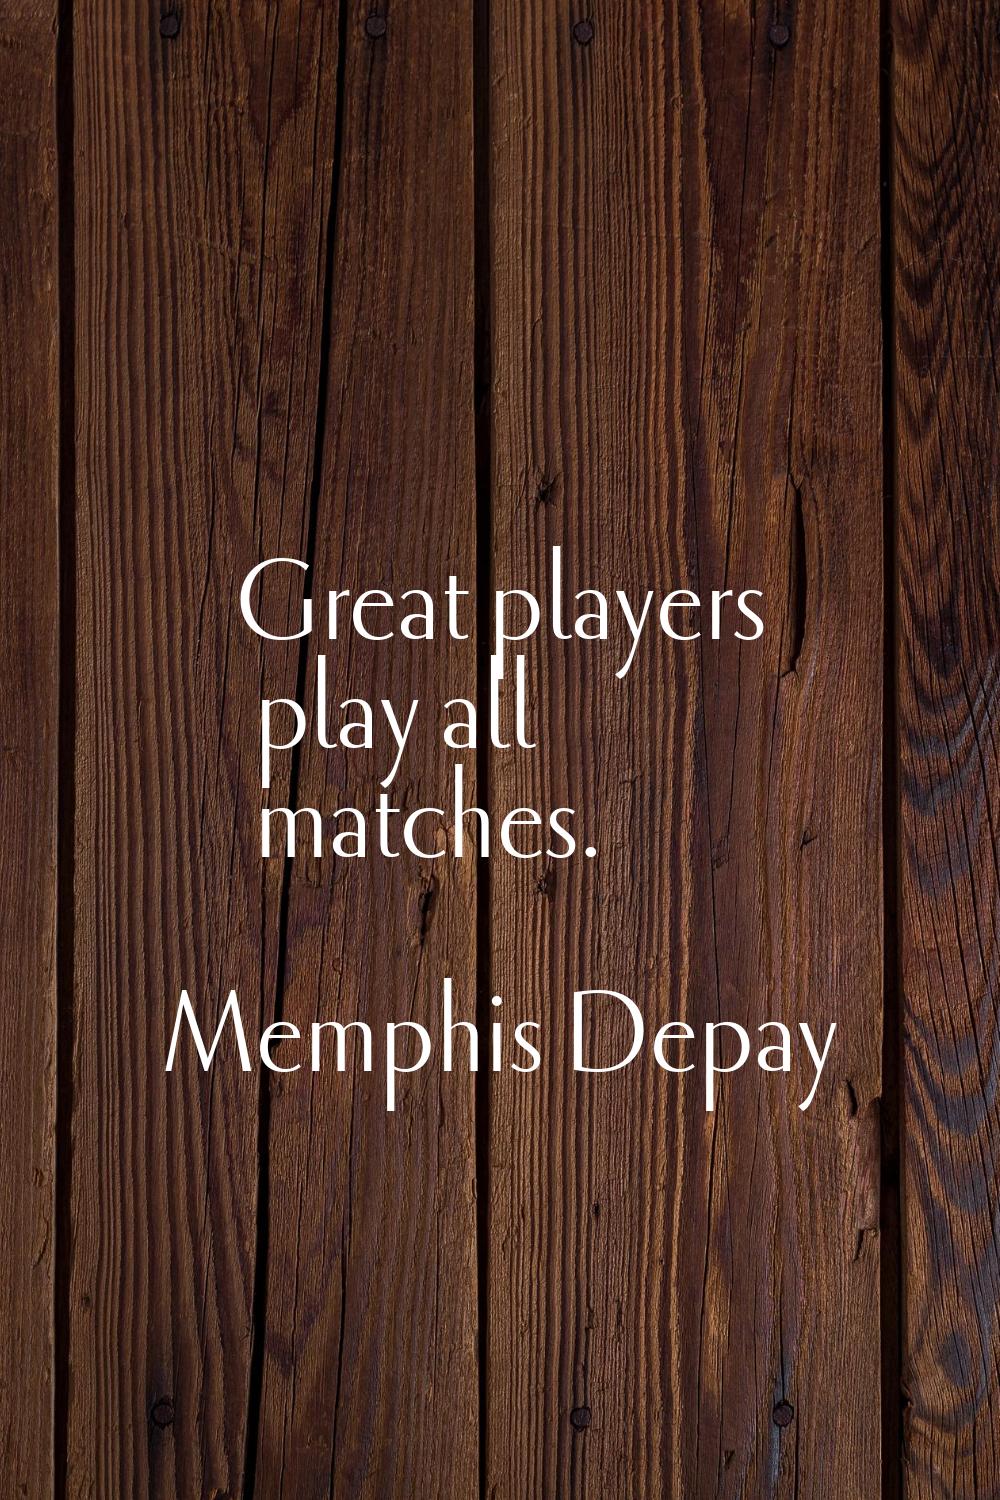 Great players play all matches.